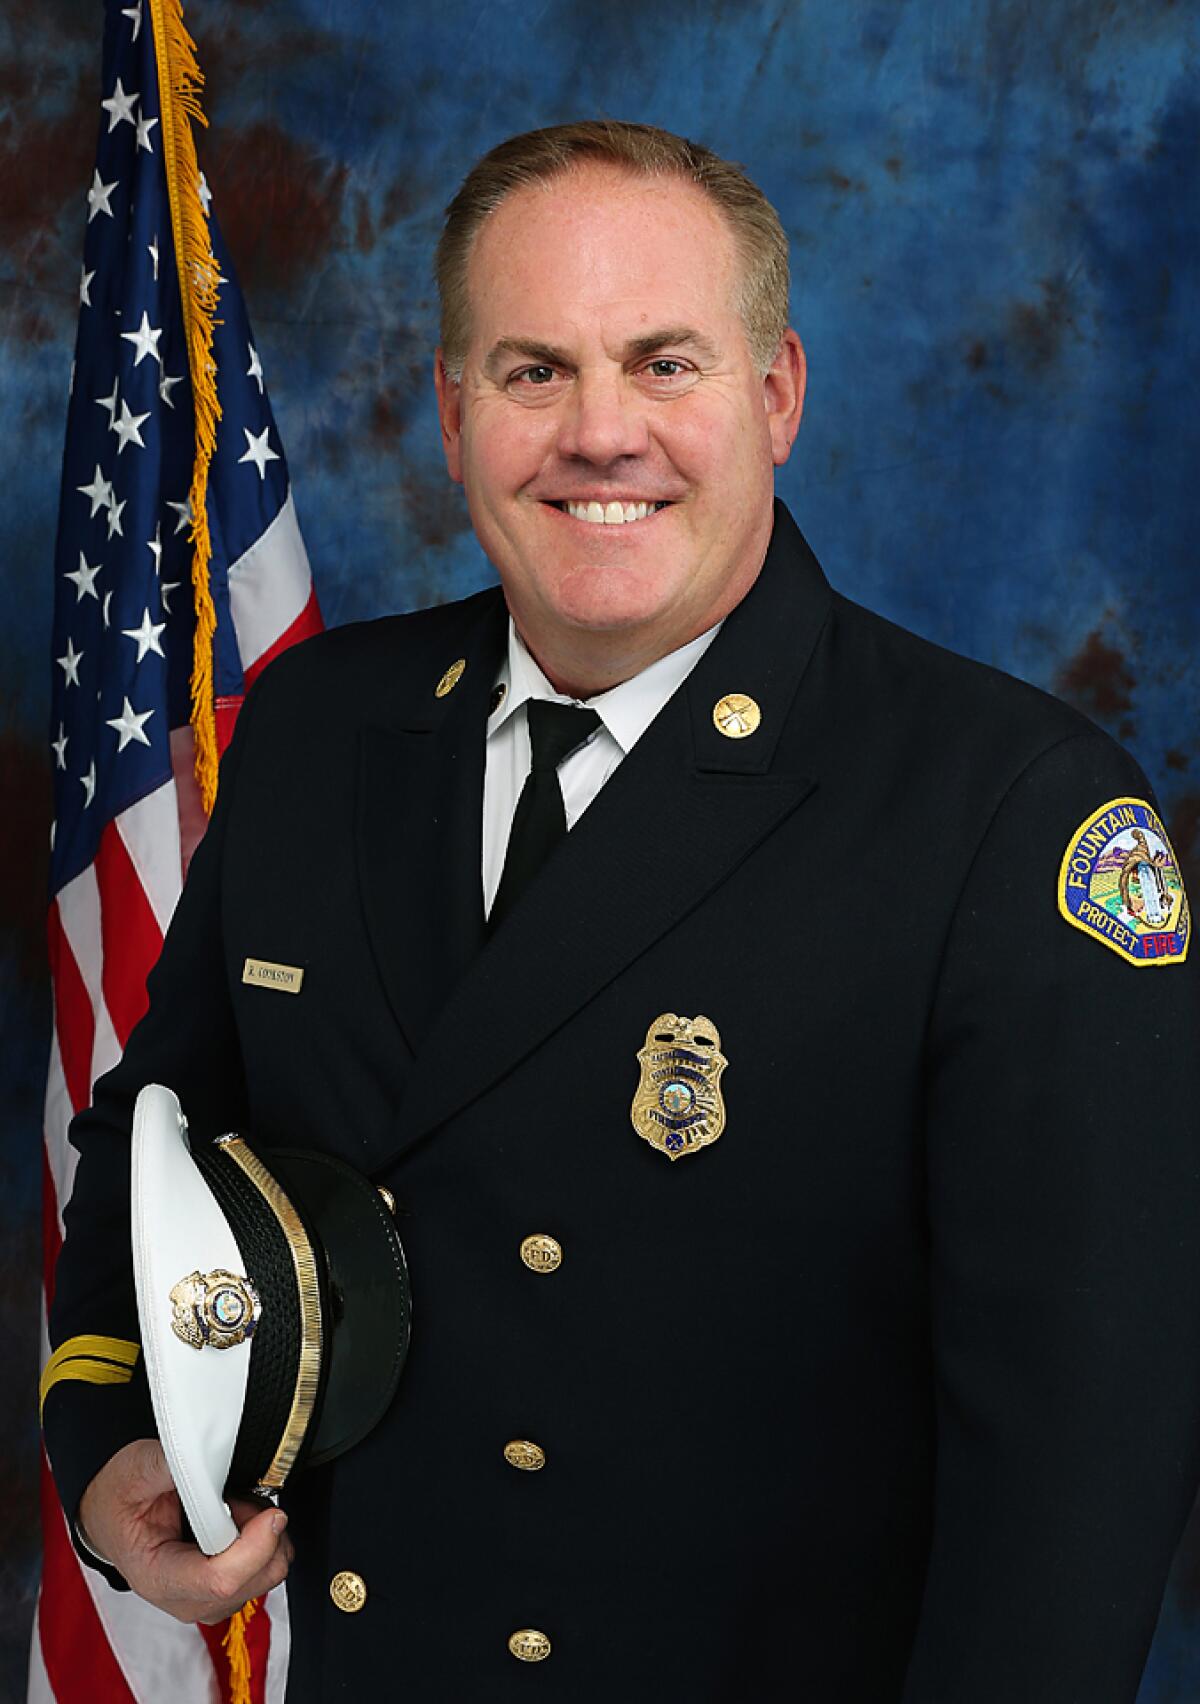 Ron Cookston, pictured, is retiring as Fountain Valley's fire chief. He has led the city's fire department since 2019.